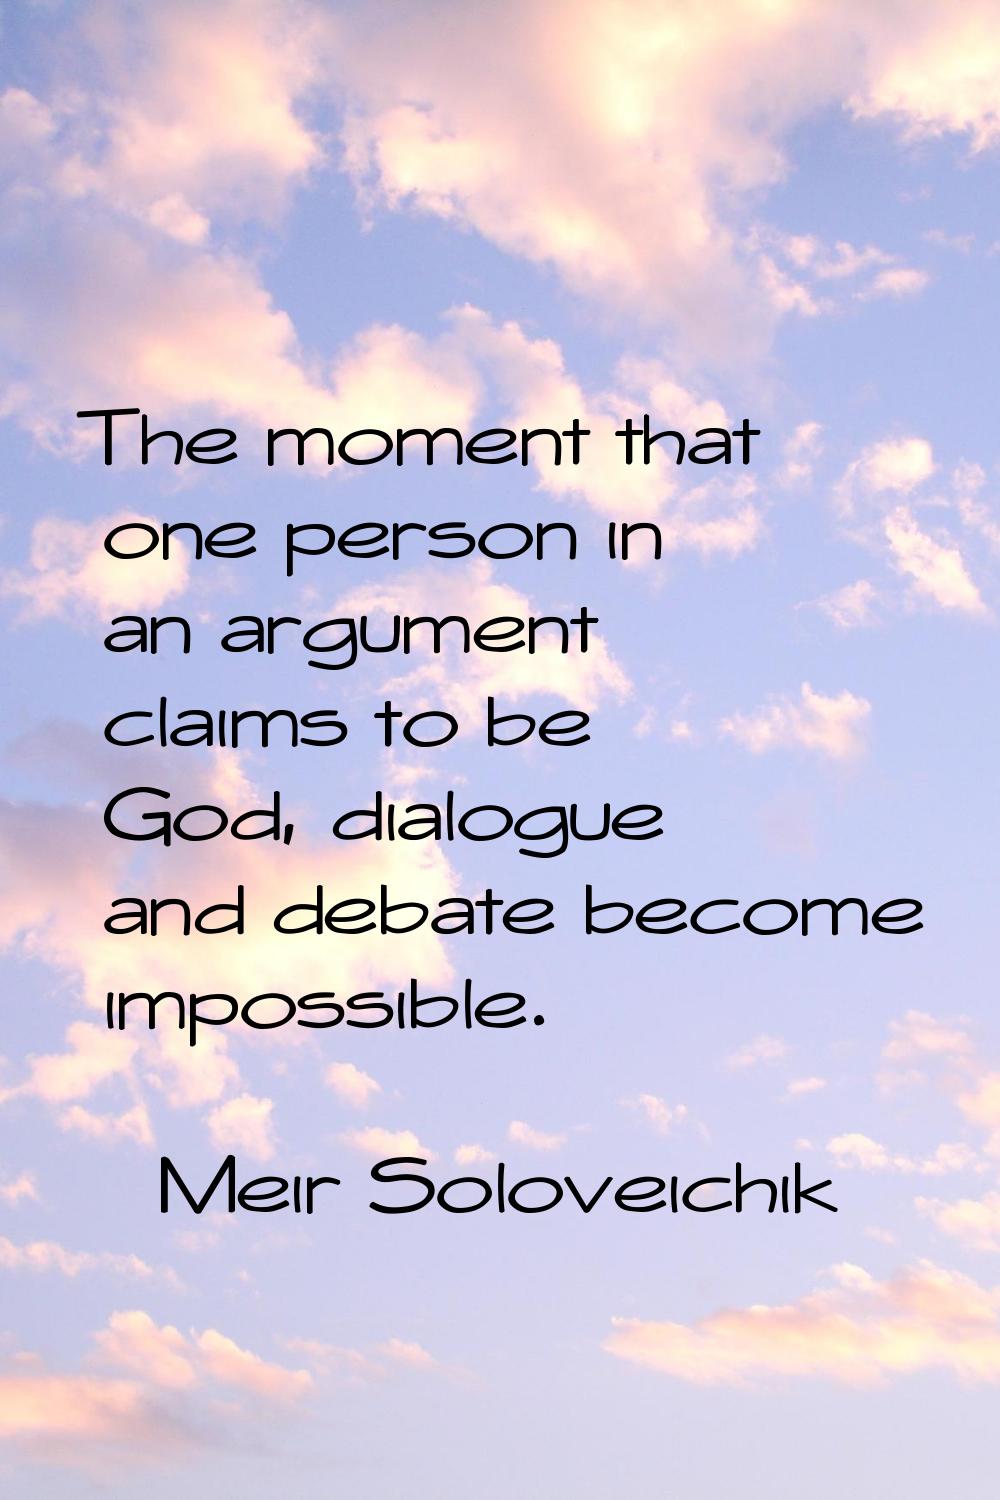 The moment that one person in an argument claims to be God, dialogue and debate become impossible.